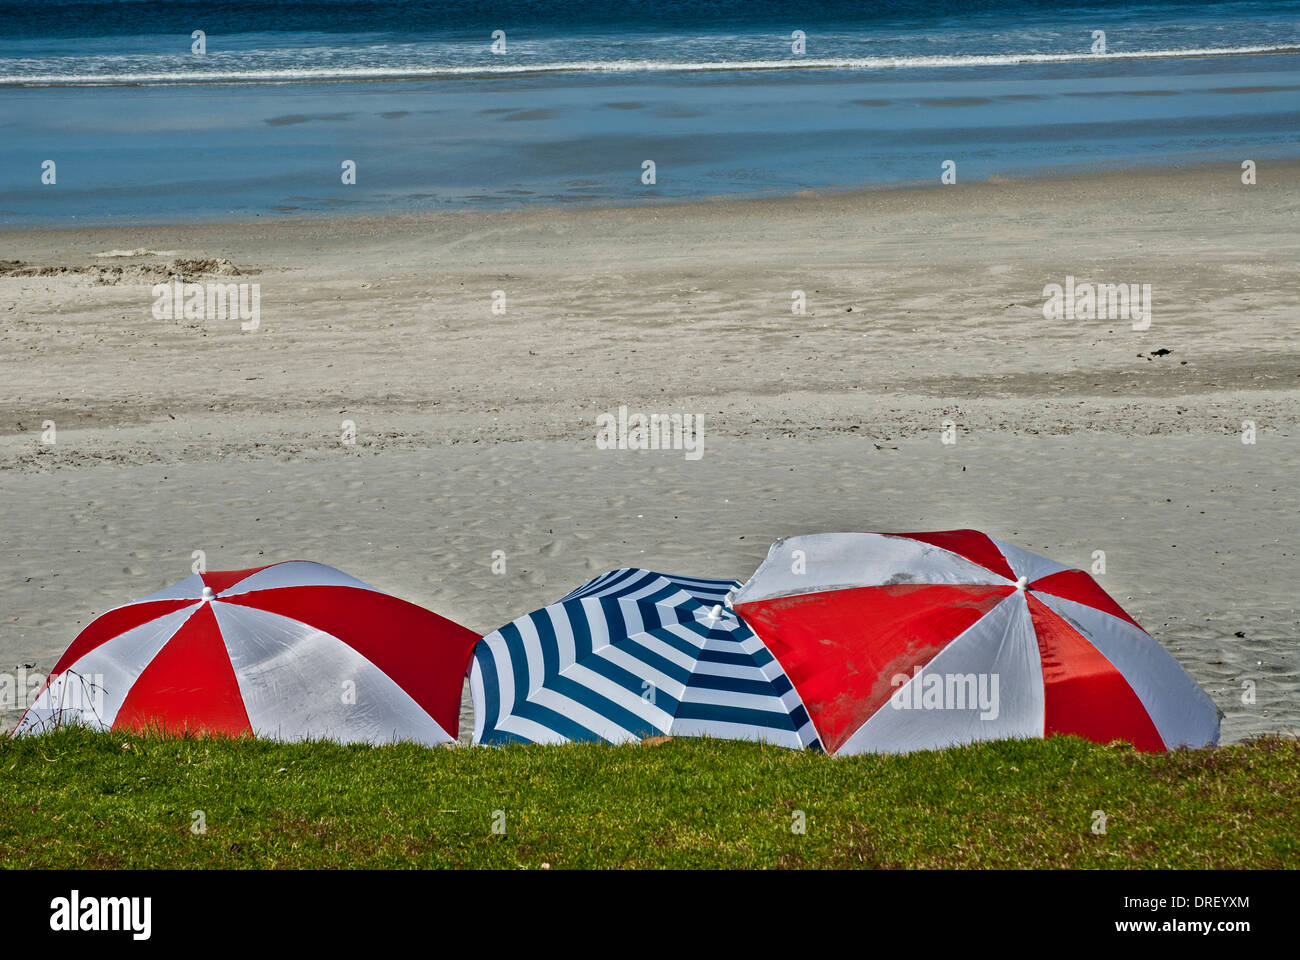 Three brightly coloured umbrellas/sunshades on Browns Beach with sand and sea beyond.n Stock Photo